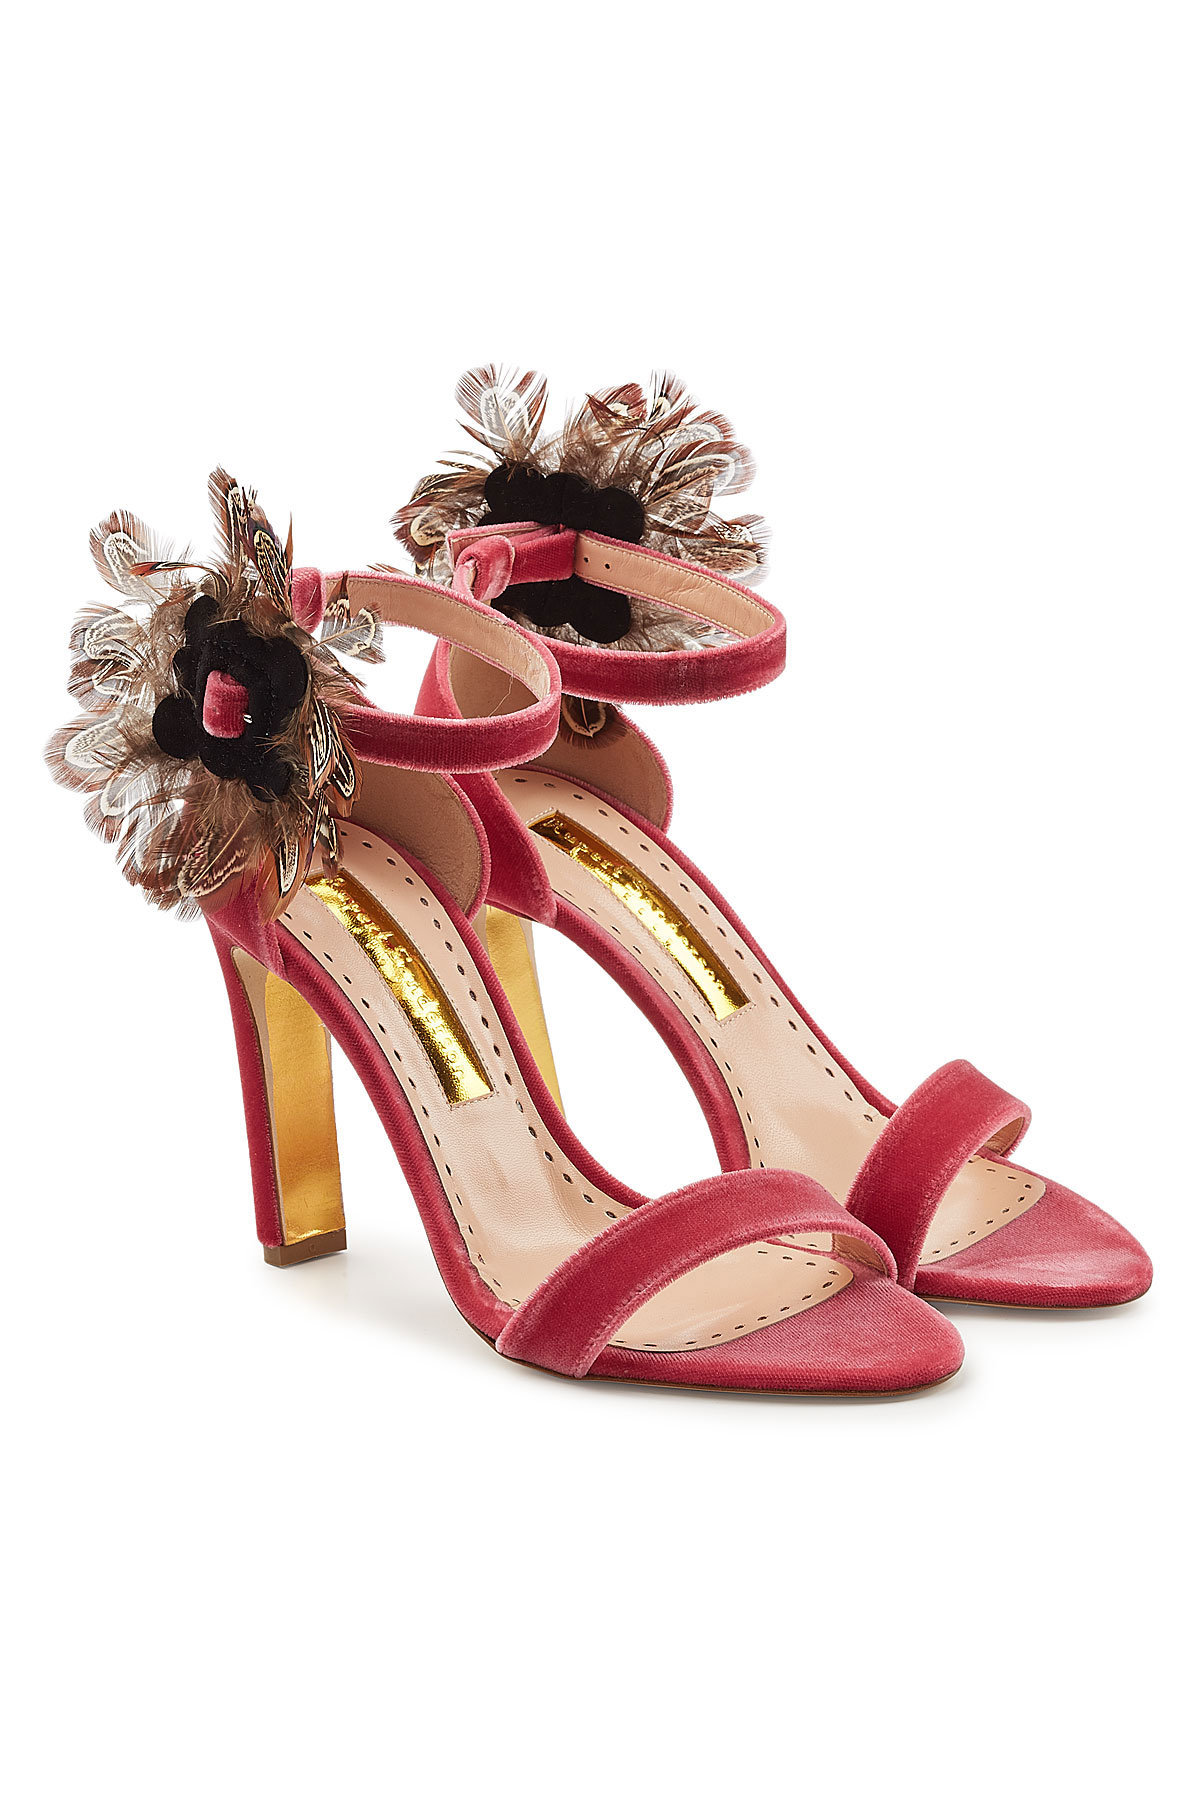 Nymphea Velvet Sandals with Feathers by Rupert Sanderson